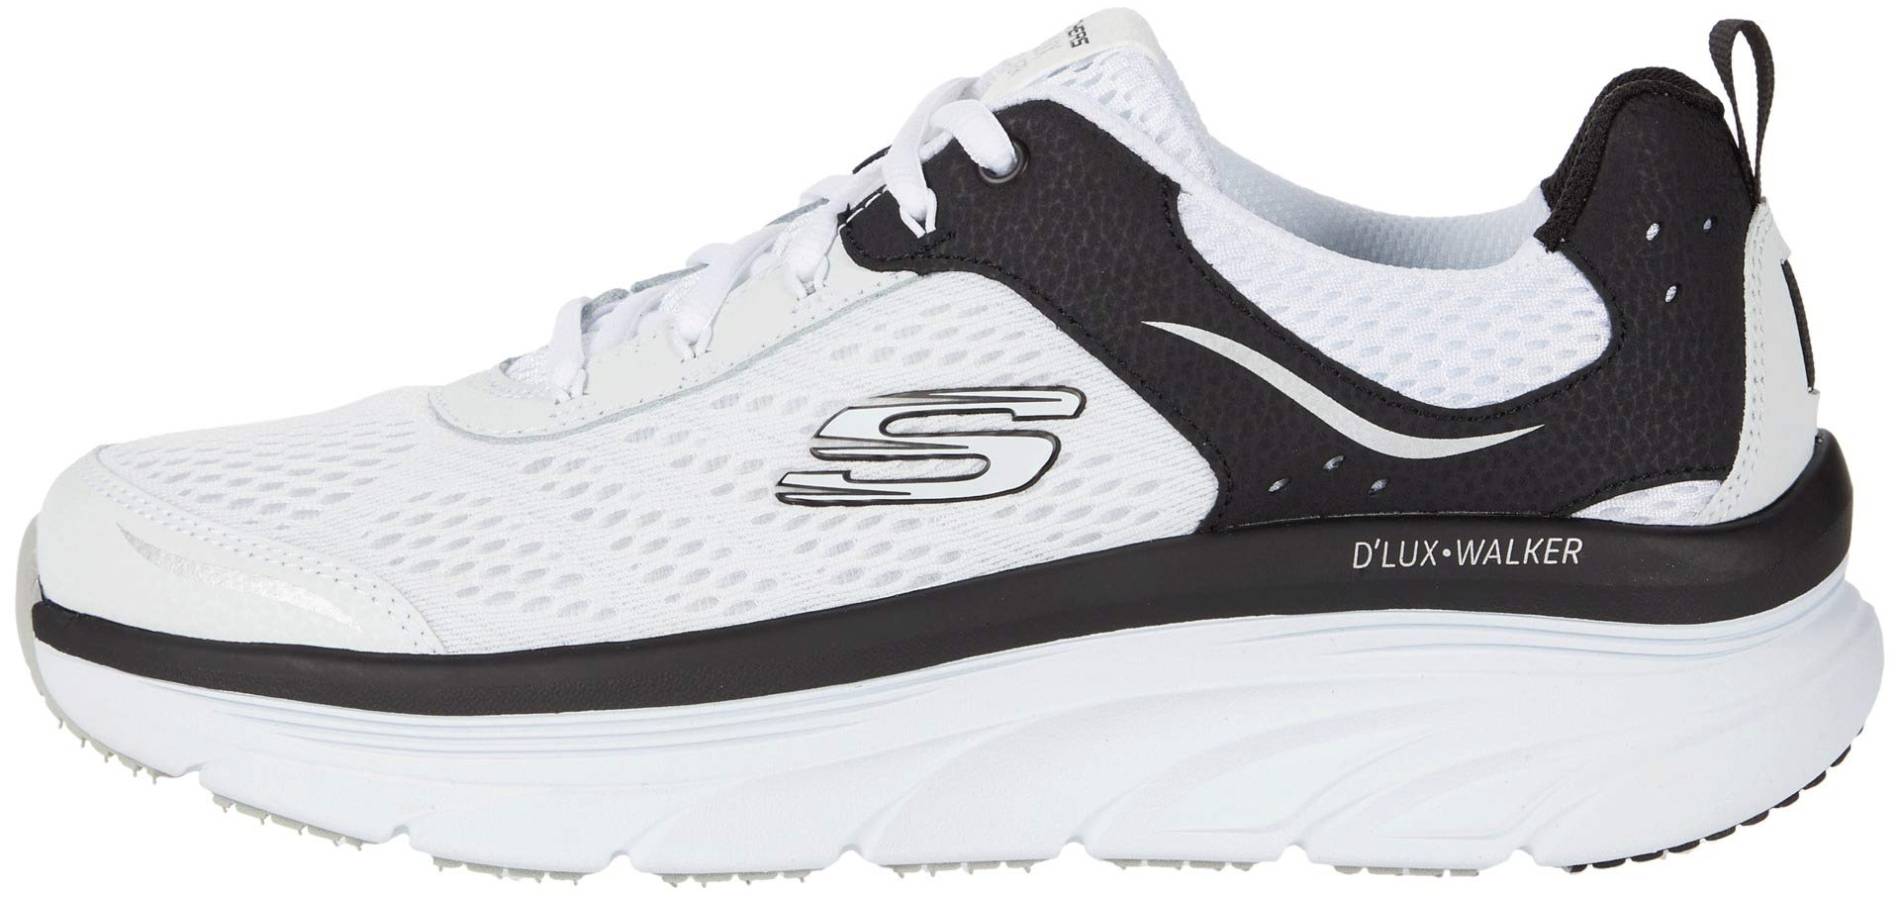 skechers relaxed fit shoes review